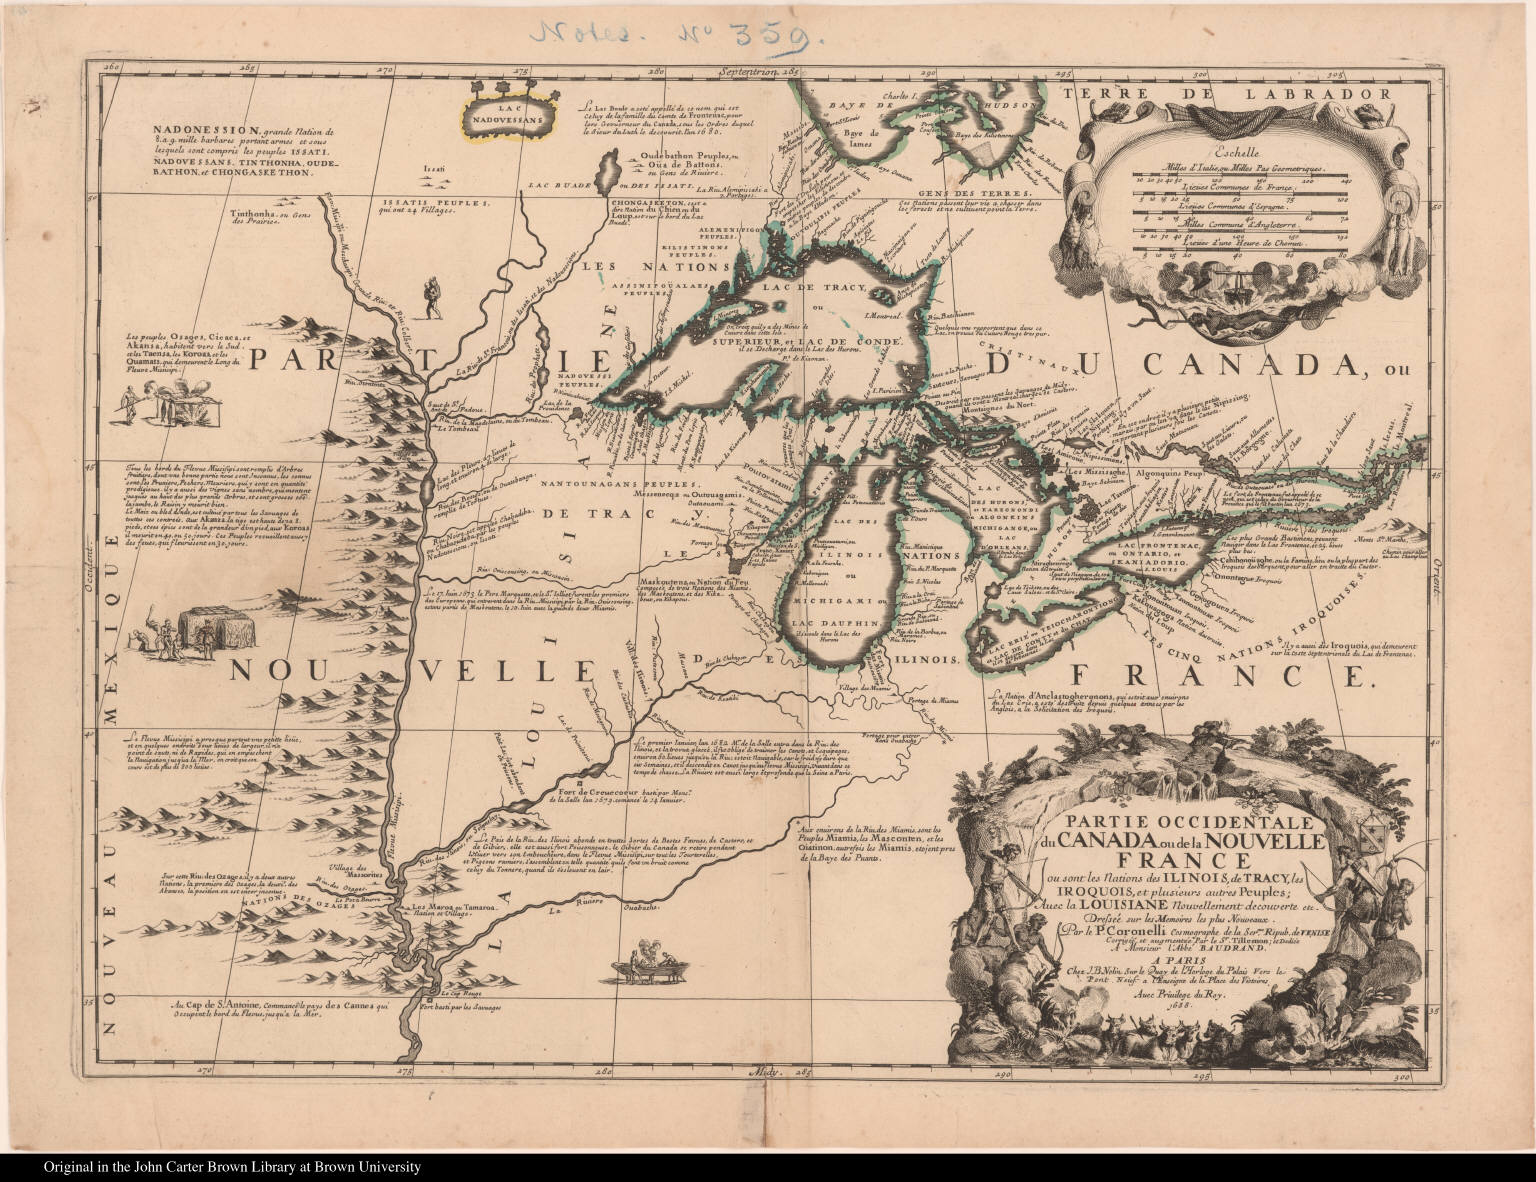 An image of the map “La Louisiane…”  made in 1695 by Vincenzo Coronelli